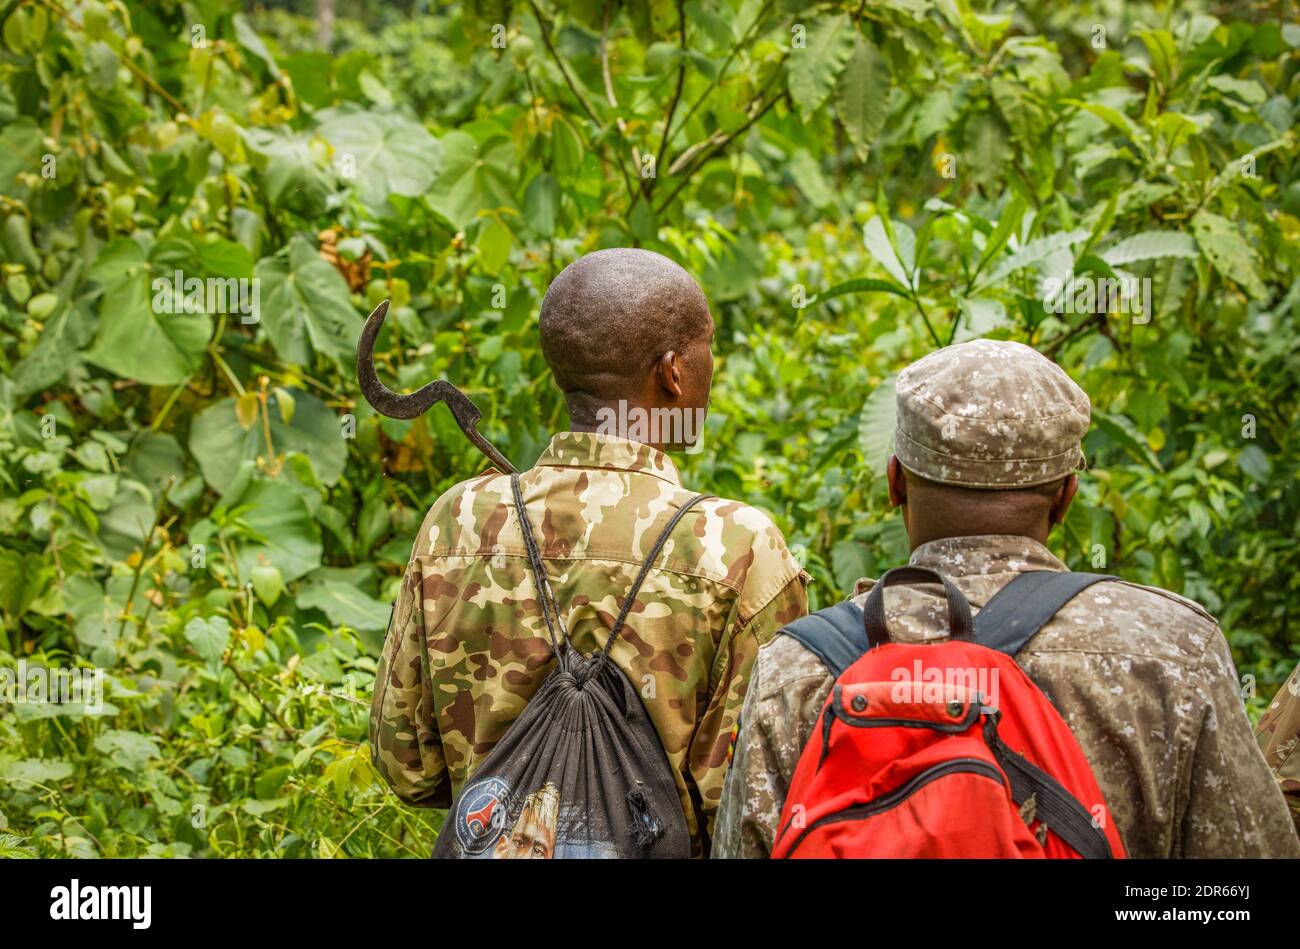 Rangers searching for mountain gorillas for a Habituation Experience, Bwindi Impenetrable Forest National Park, Uganda. Stock Photo